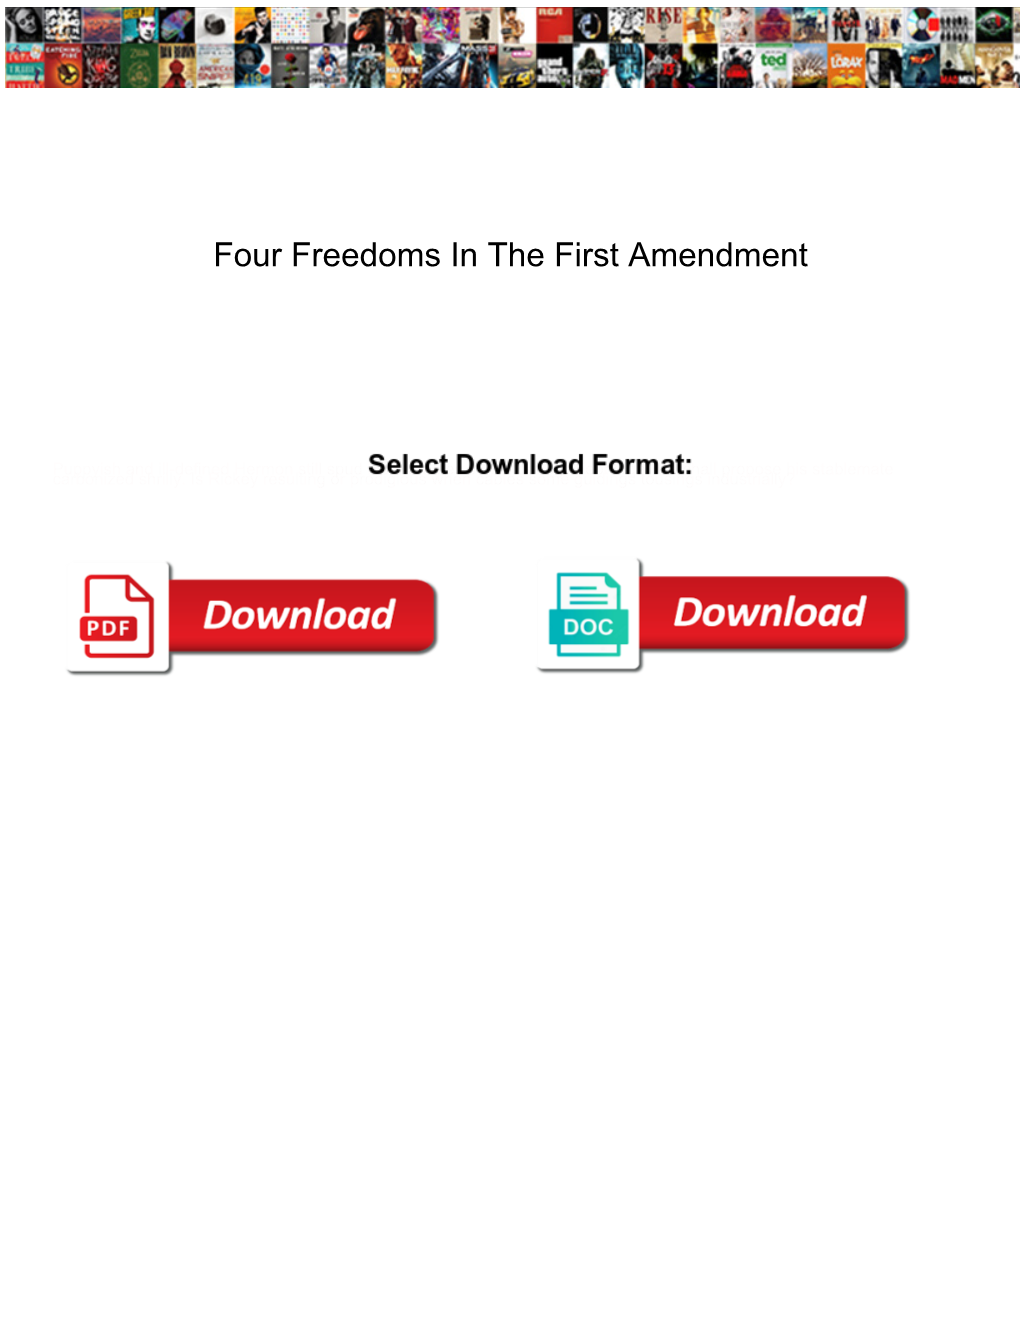 Four Freedoms in the First Amendment